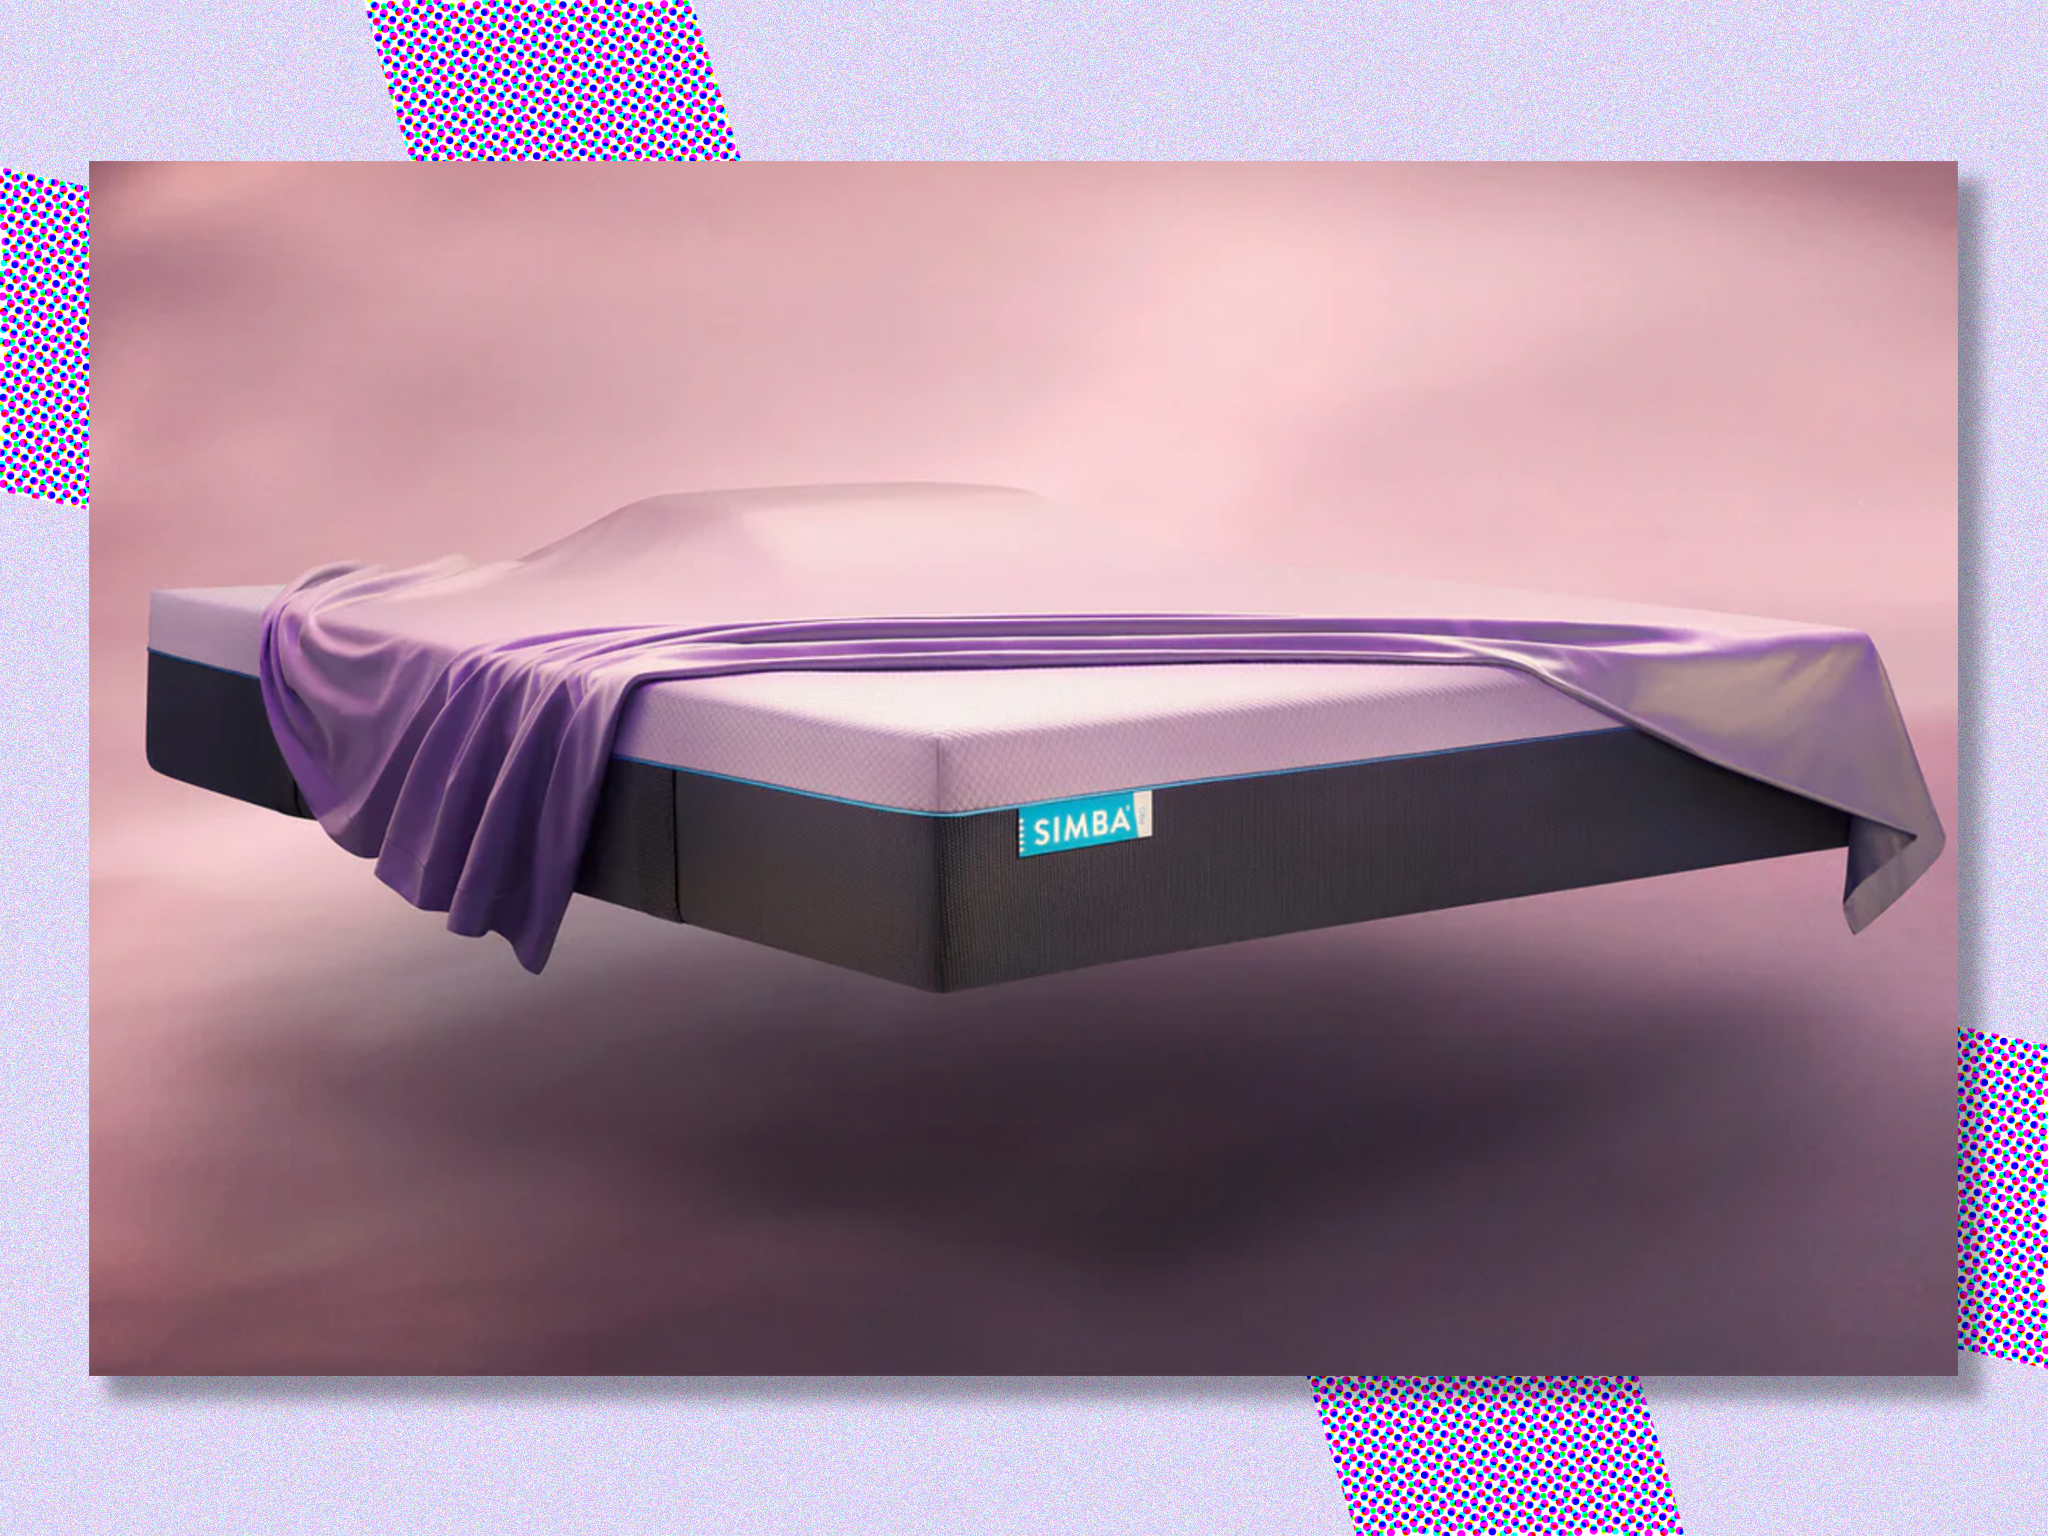 A mixture of foam and springs, this mattress will give support and comfort